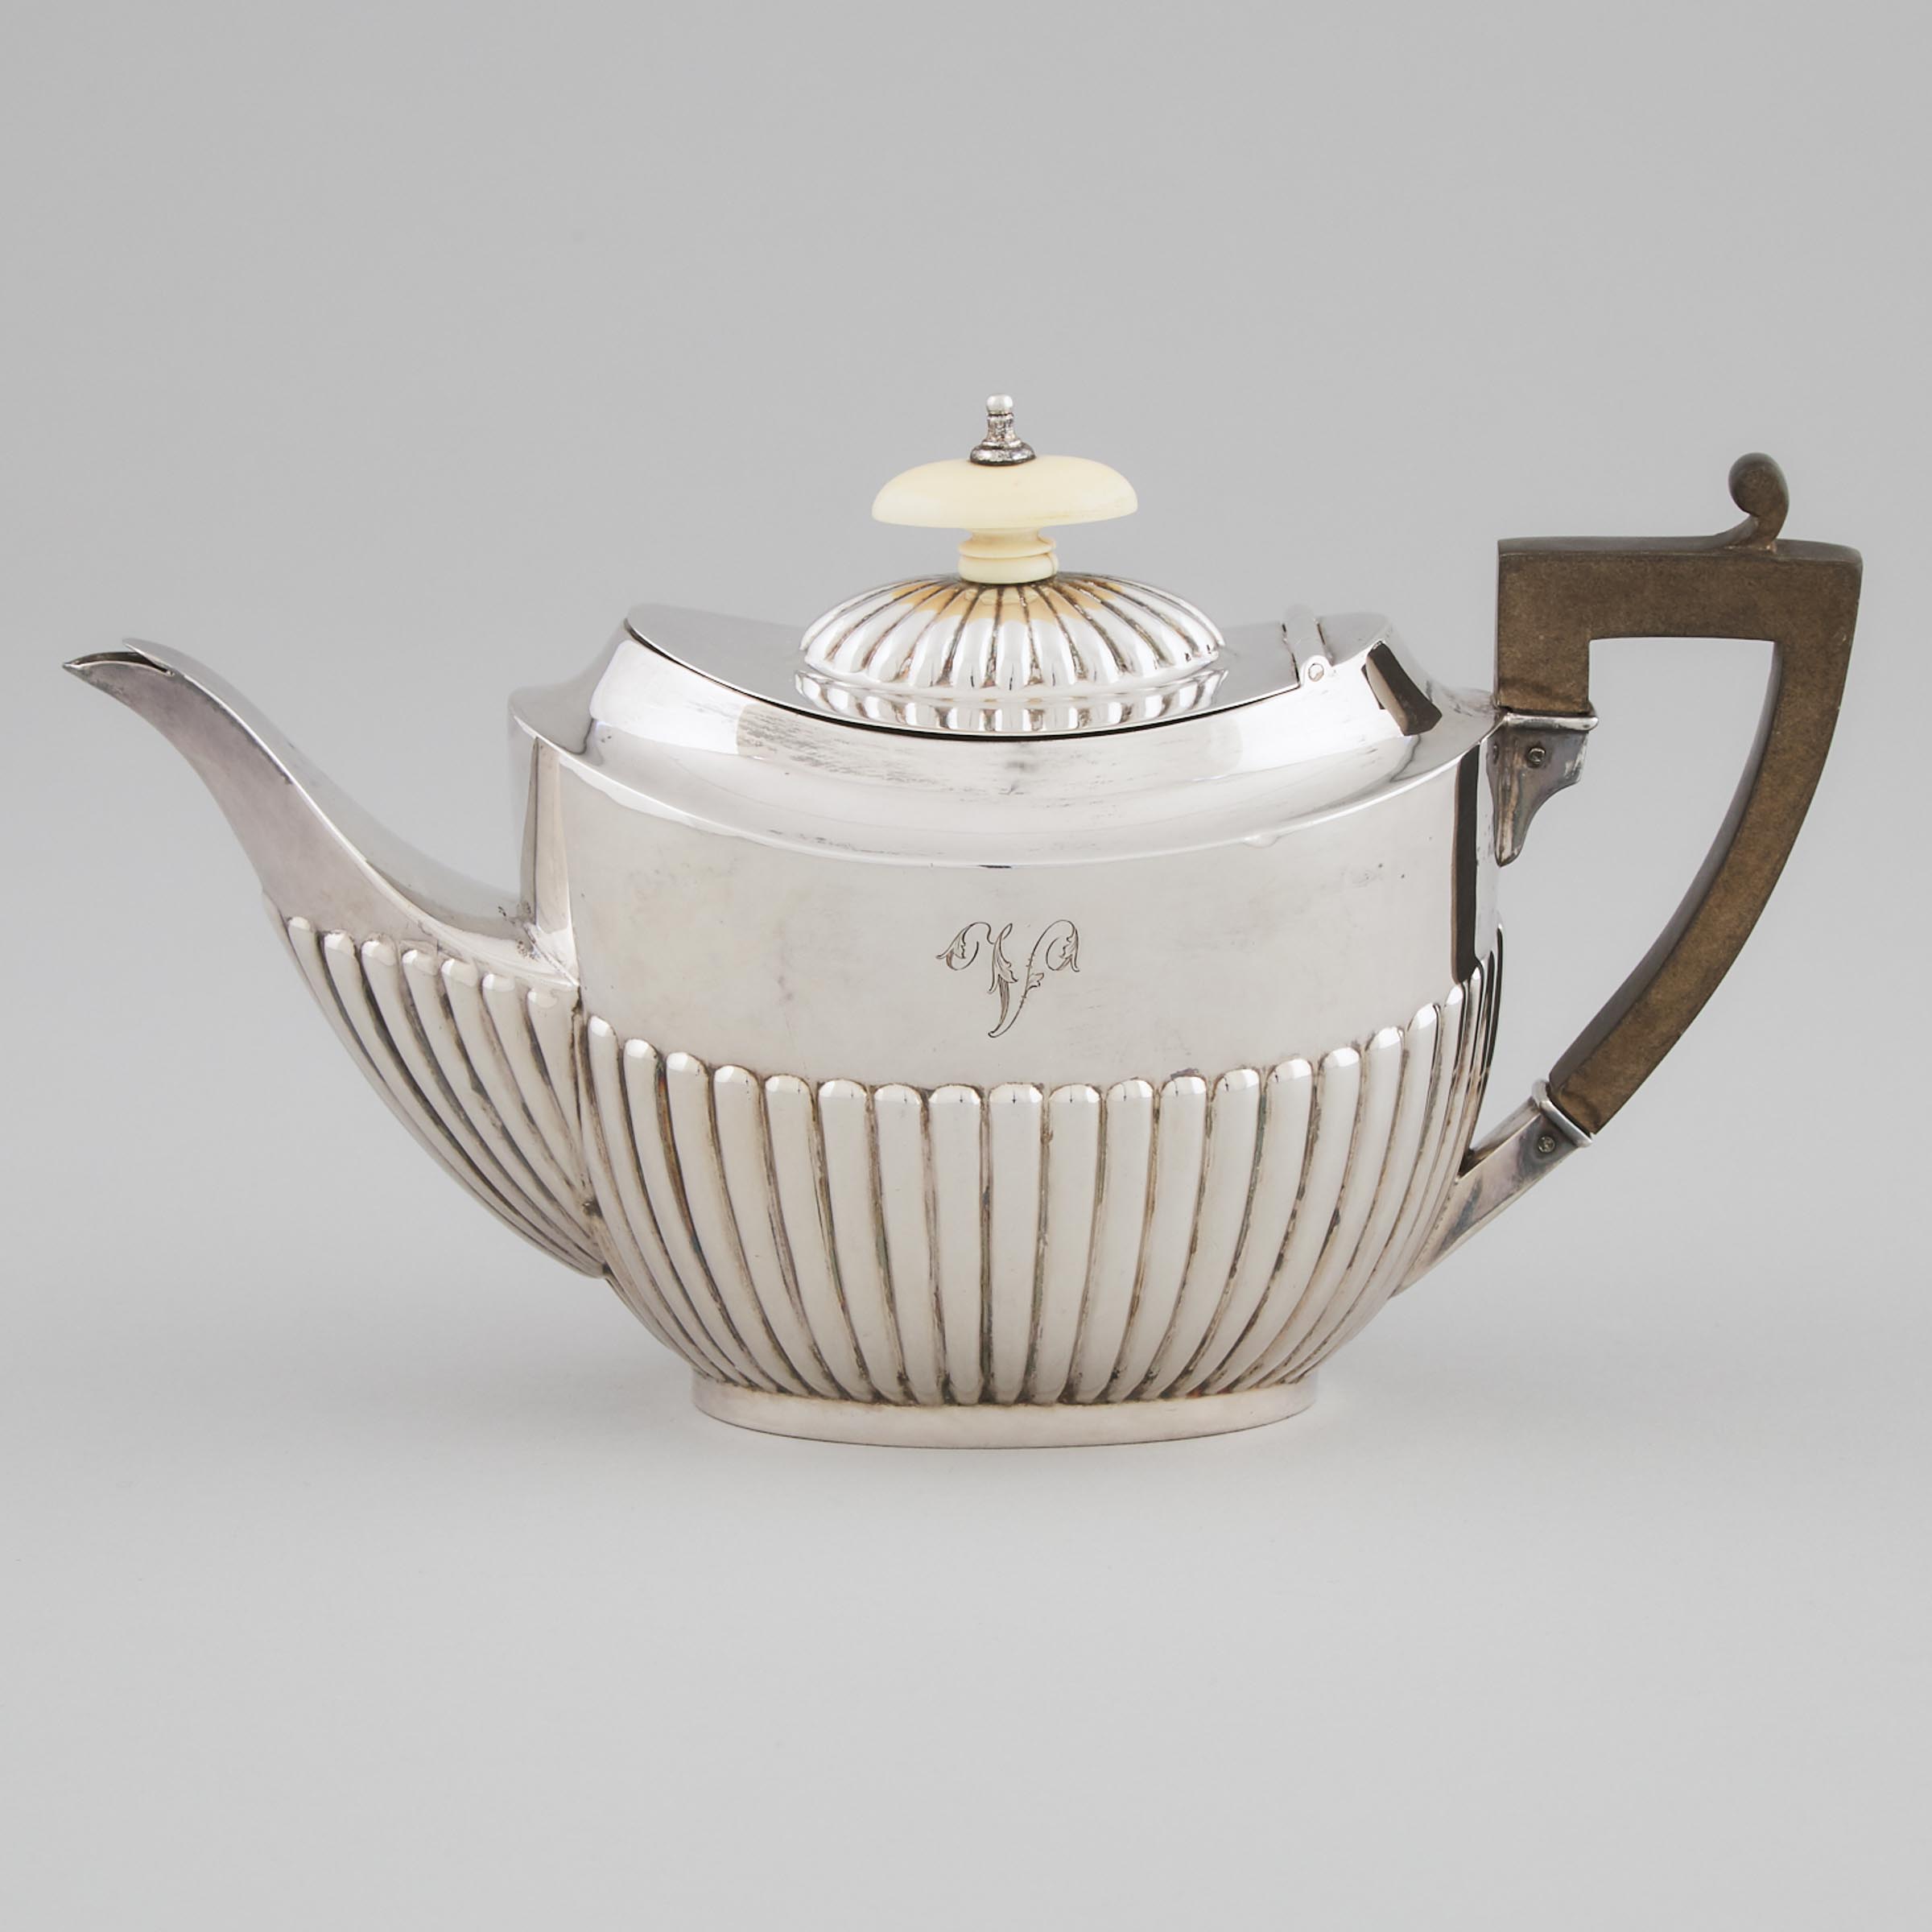 Canadian Silver Small Teapot, Henry Birks & Sons, Montreal, Que., 20th century